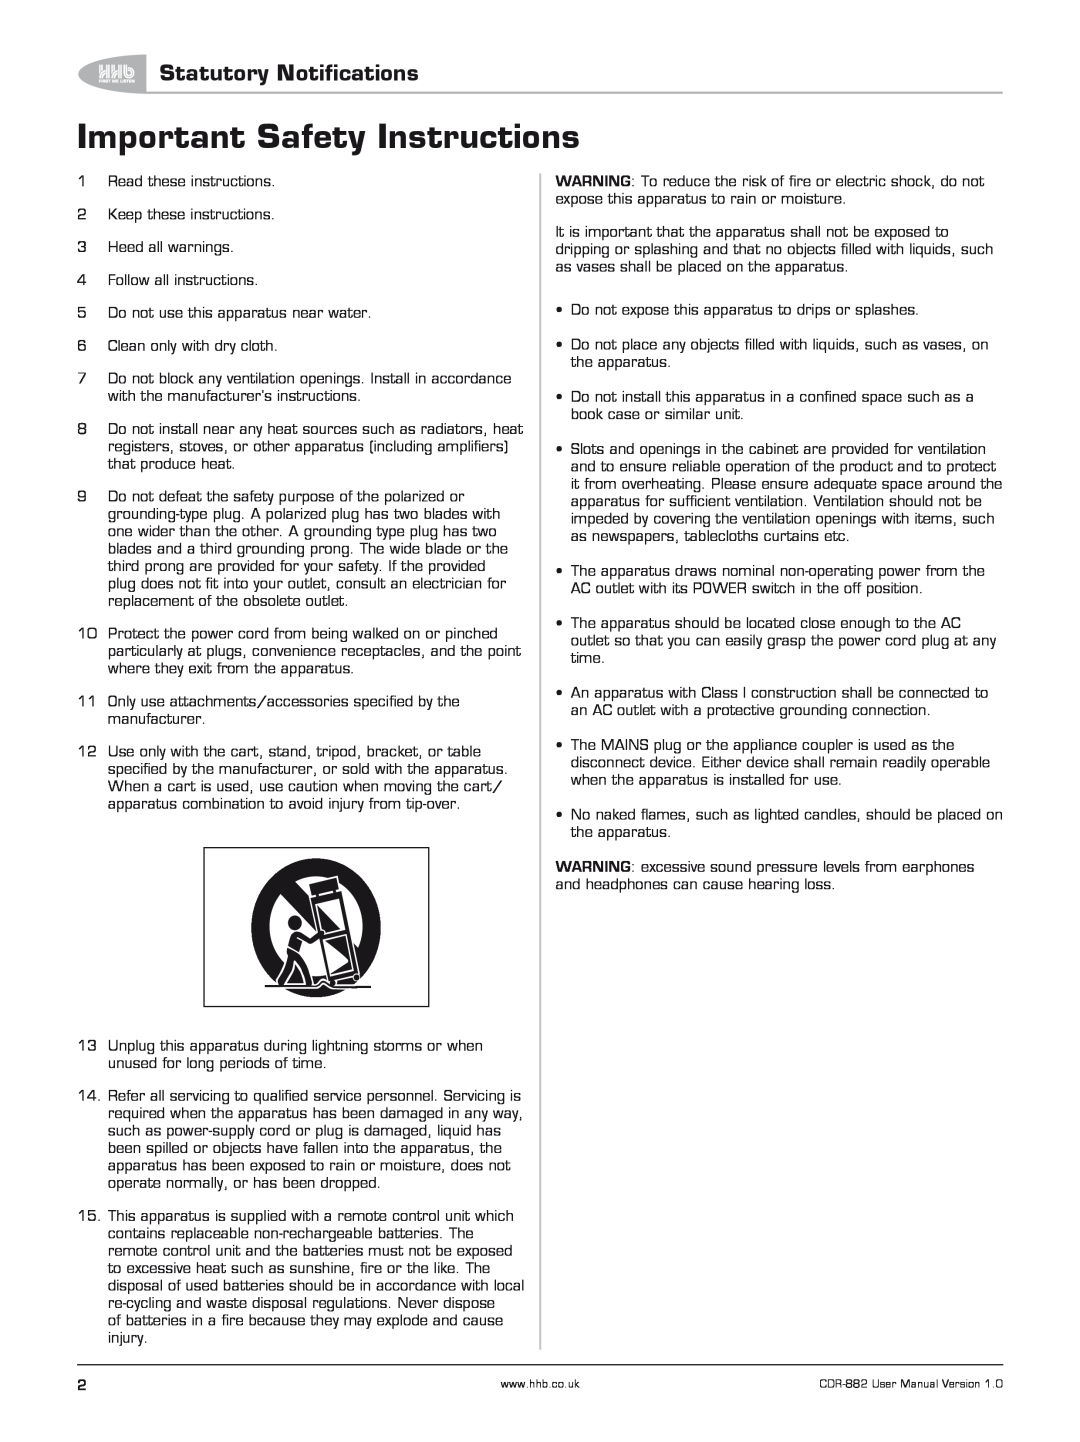 HHB comm CDR-882 user manual Important Safety Instructions, Statutory Notifications 